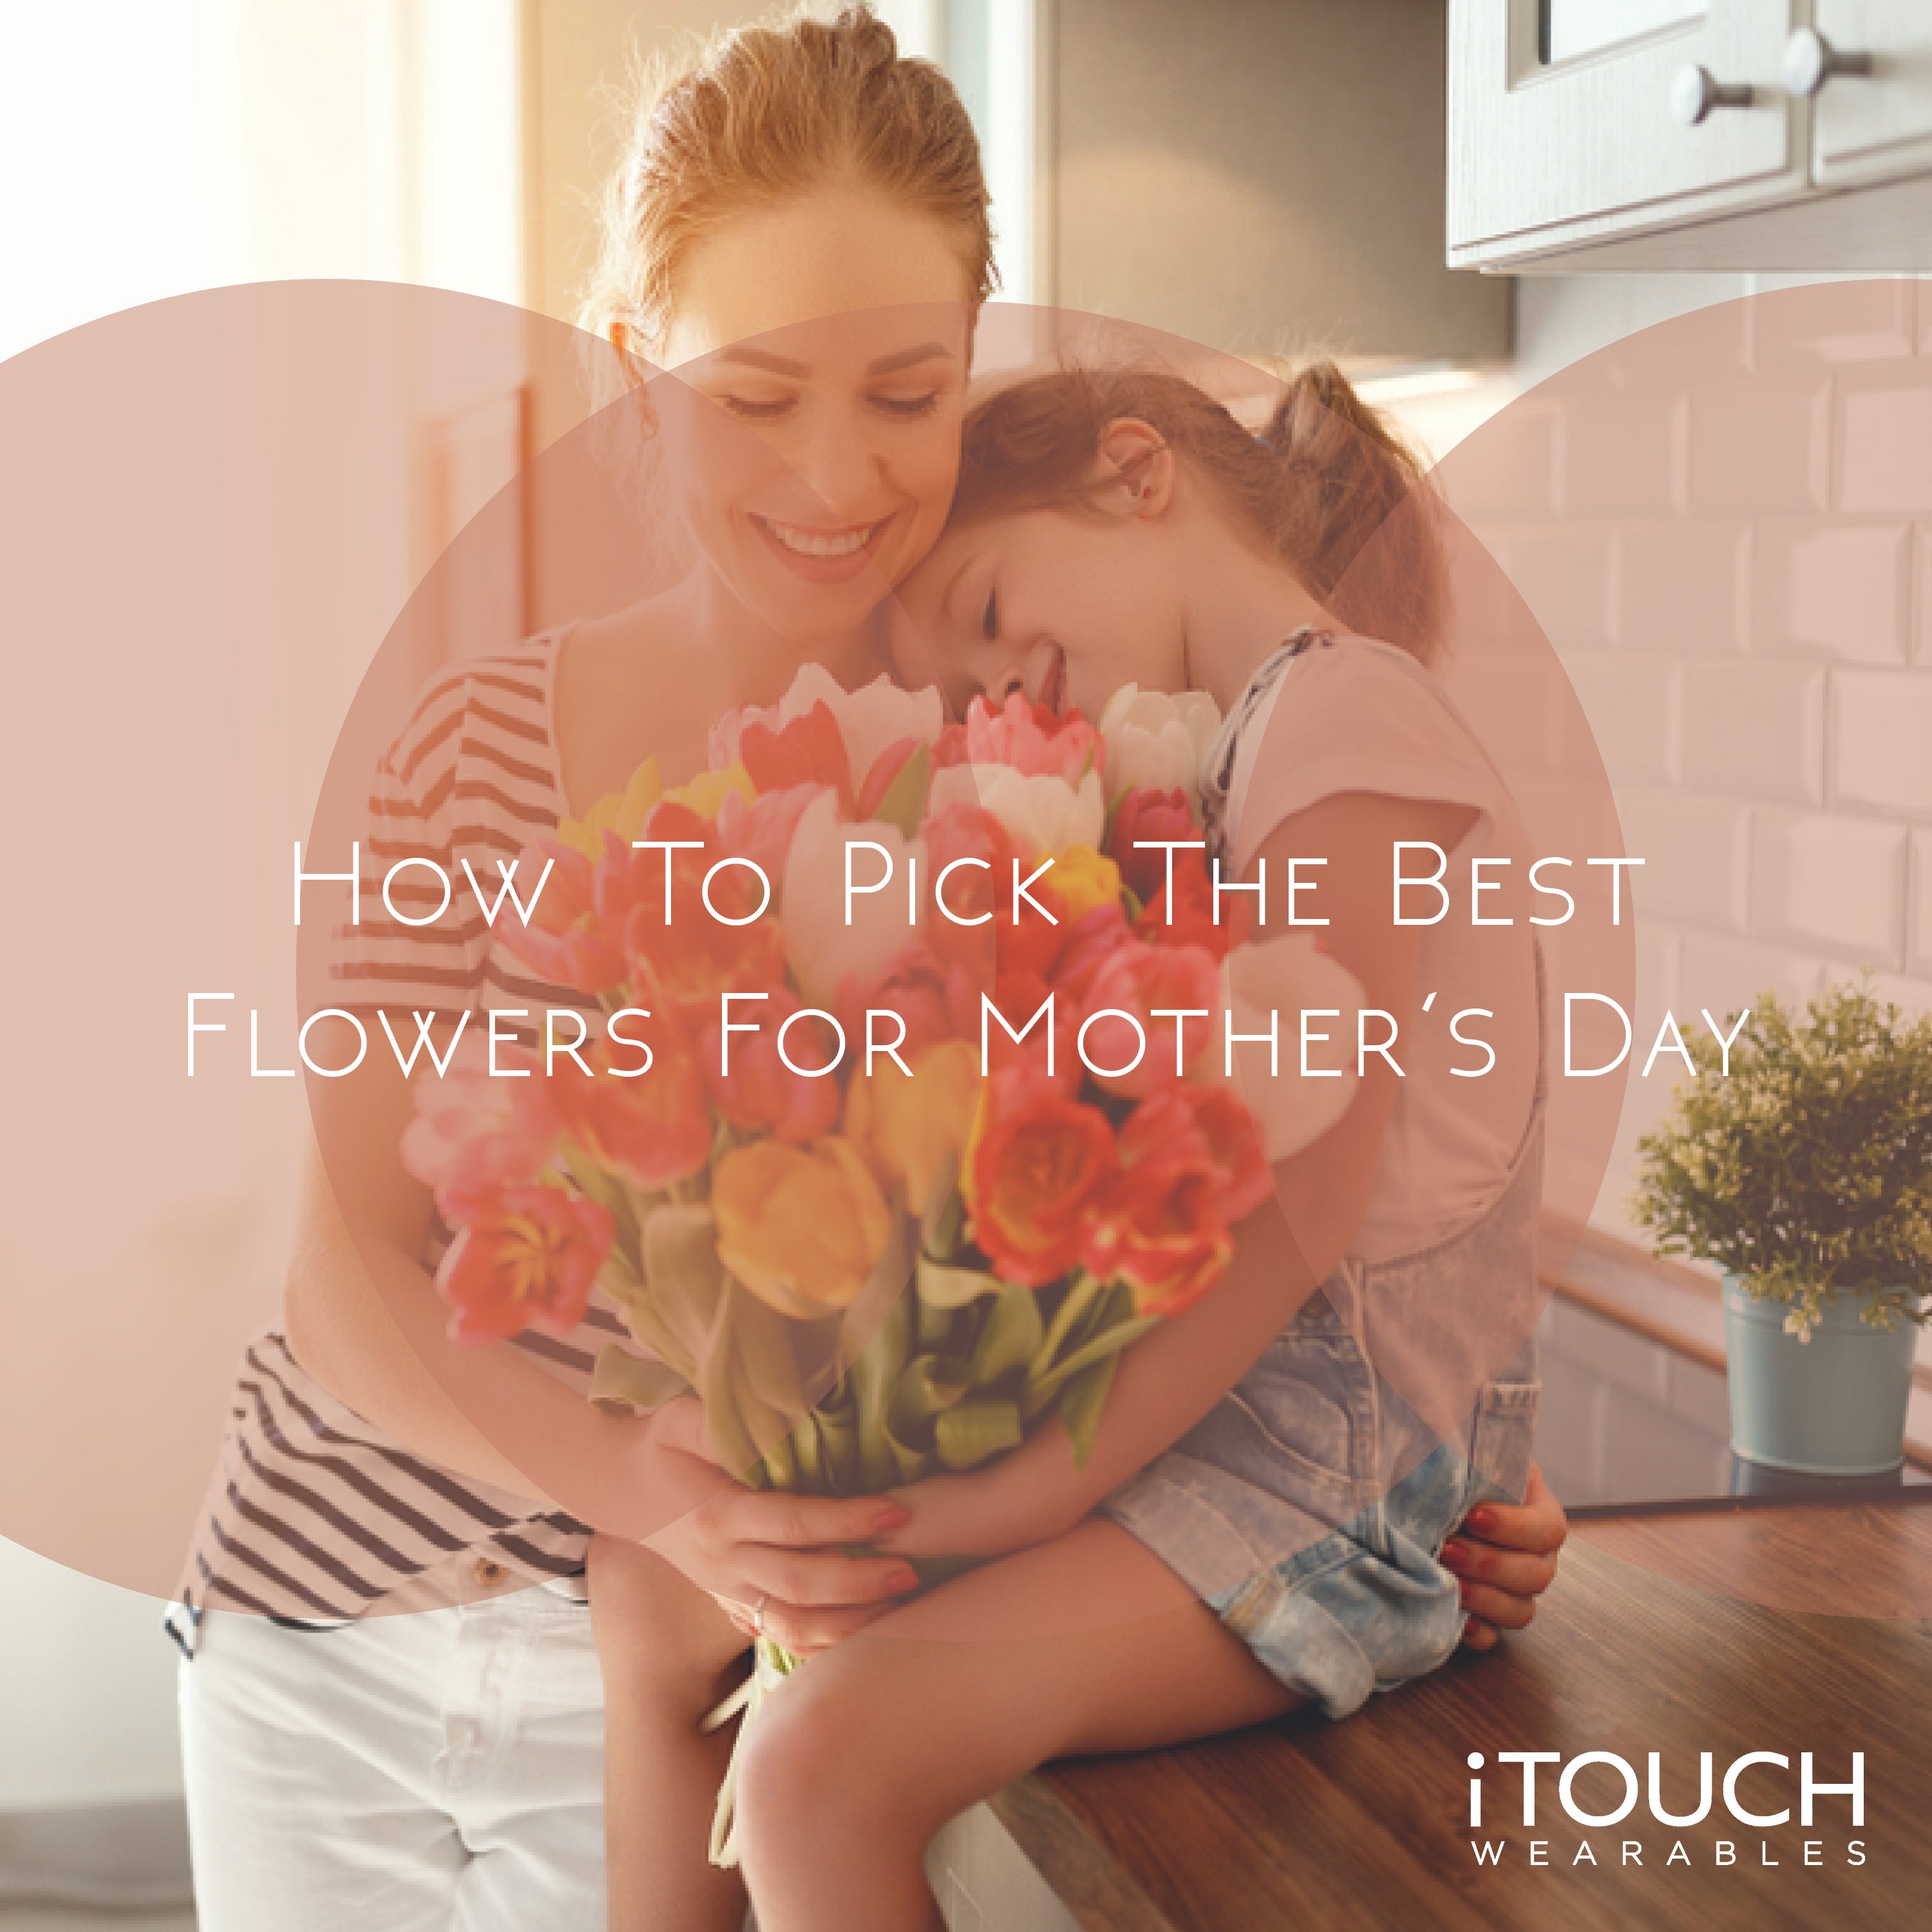 How To Pick The Best Flowers For Mother's Day